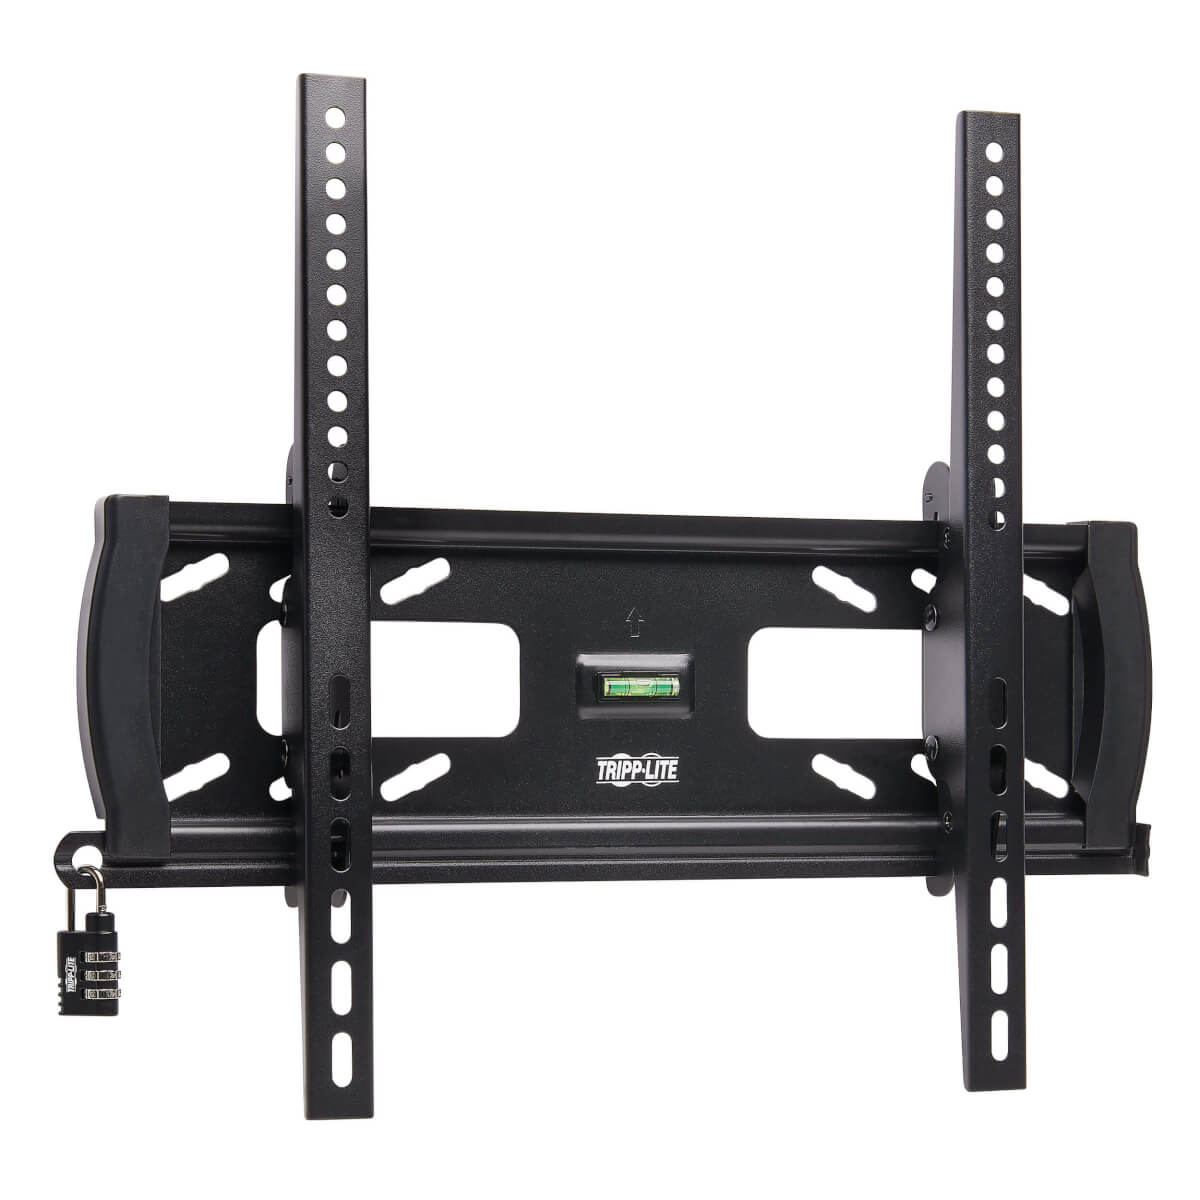 Tripp Lite DWTSC3255MUL Heavy-Duty Tilt Security Wall Mount for 32" to 55" TVs and Monitors, Flat or Curved Screens, UL Certified